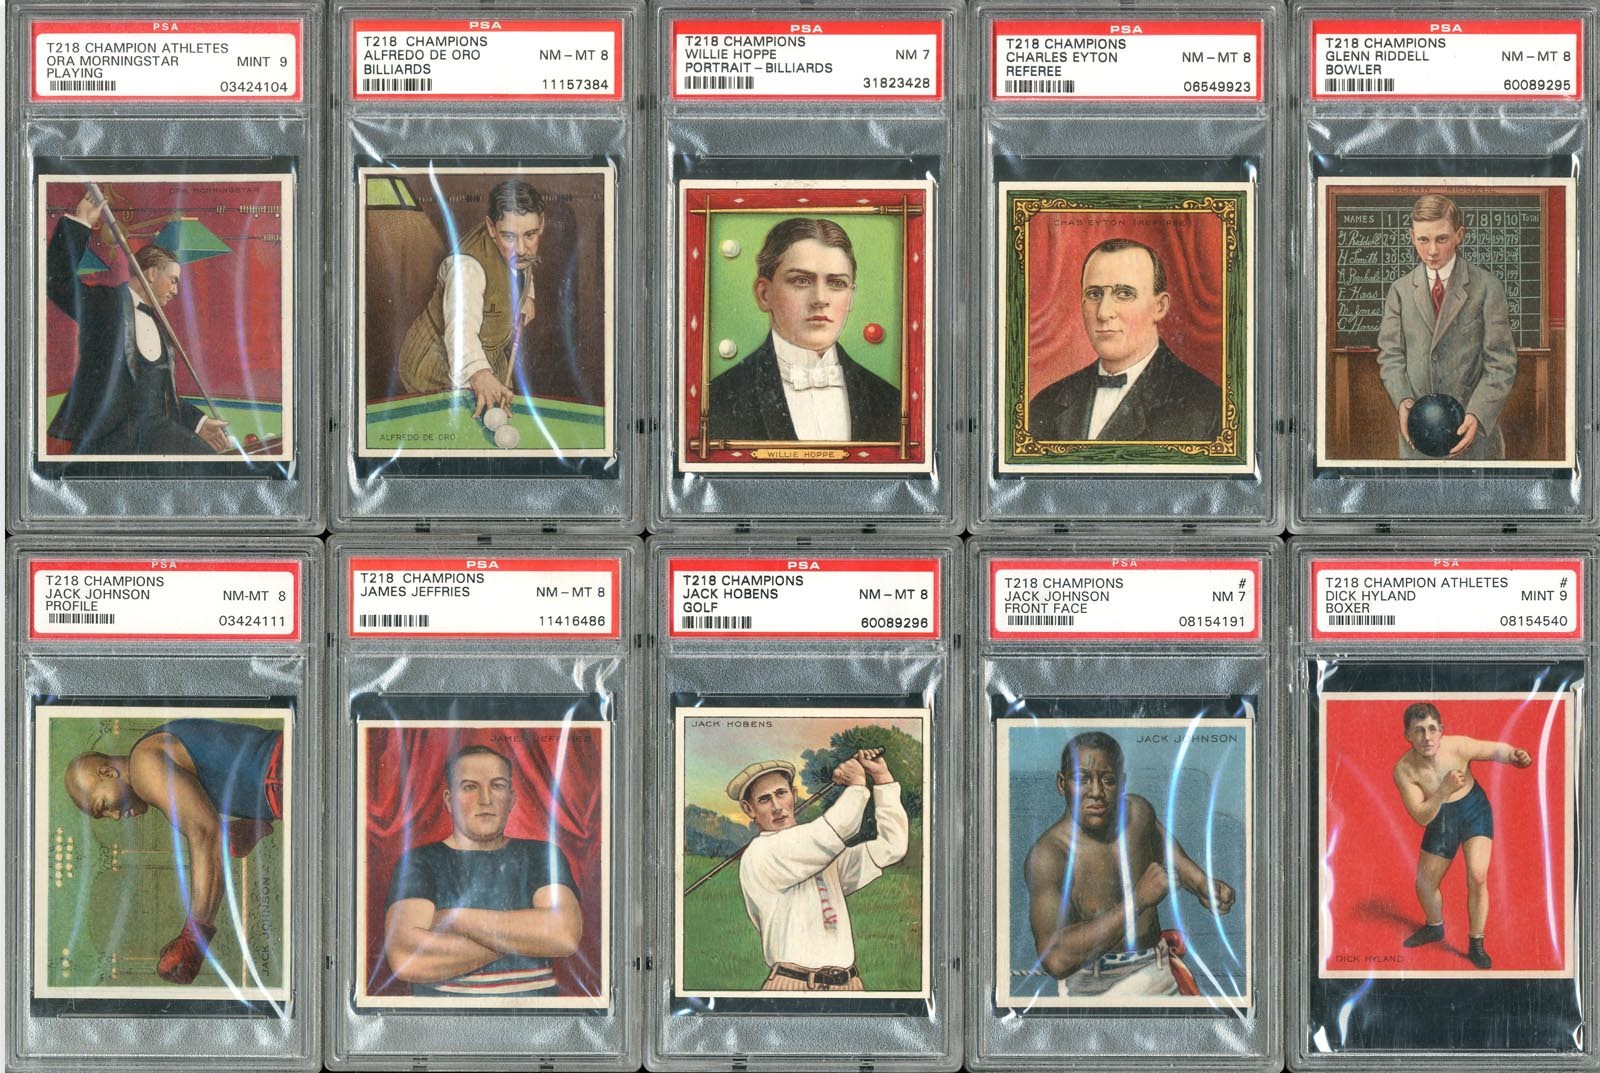 All-Time Greatest 1910 T218 Champions Complete Graded Set - #1 on PSA Registry (8.02 GPA)